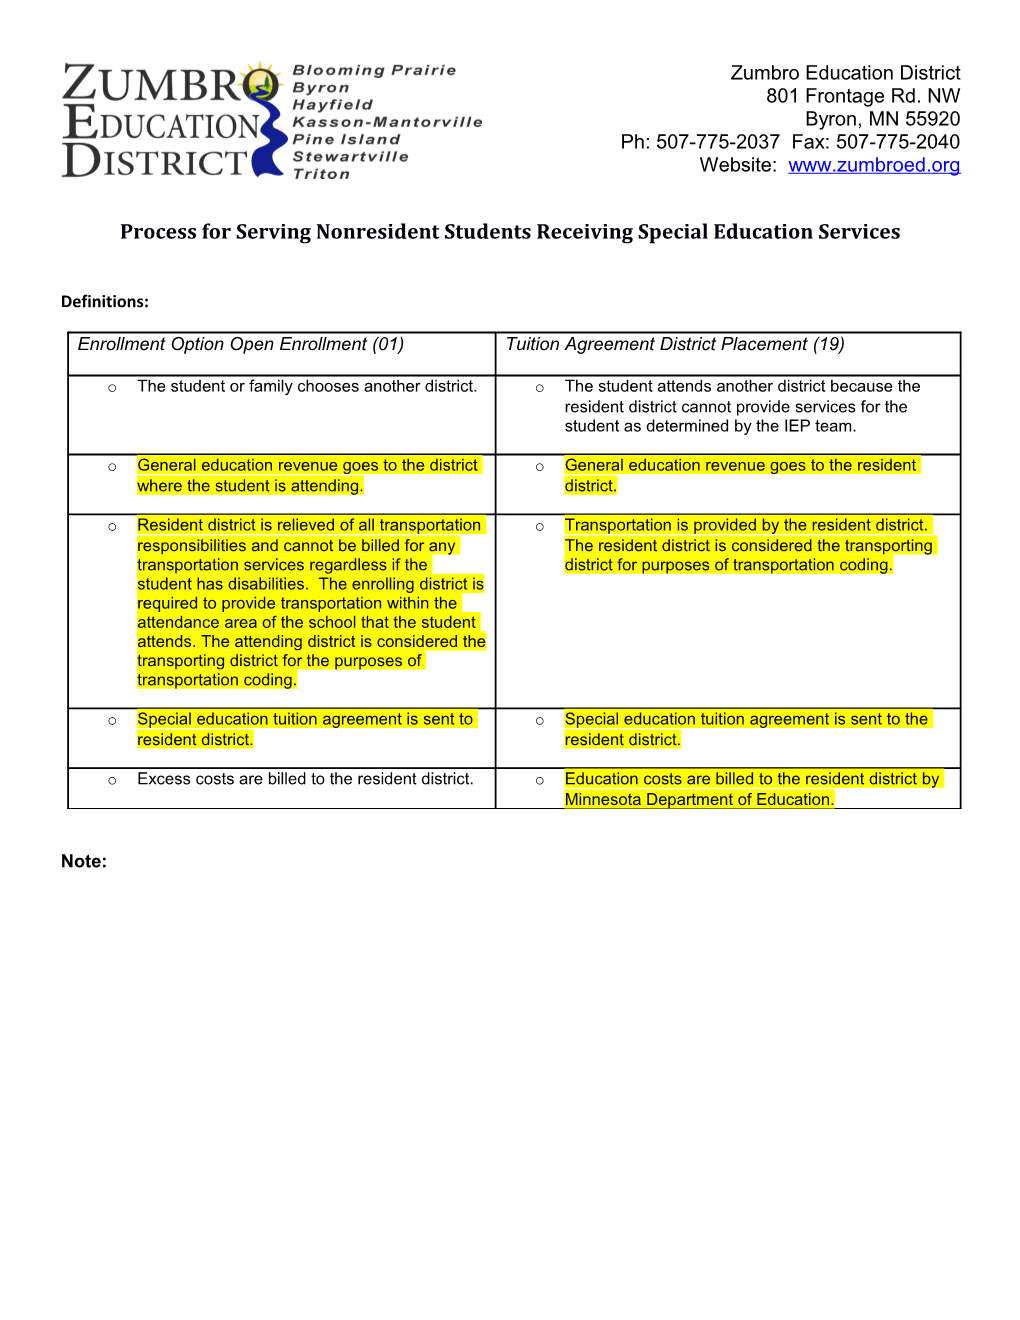 Process for Serving Nonresident Students Receiving Special Education Services